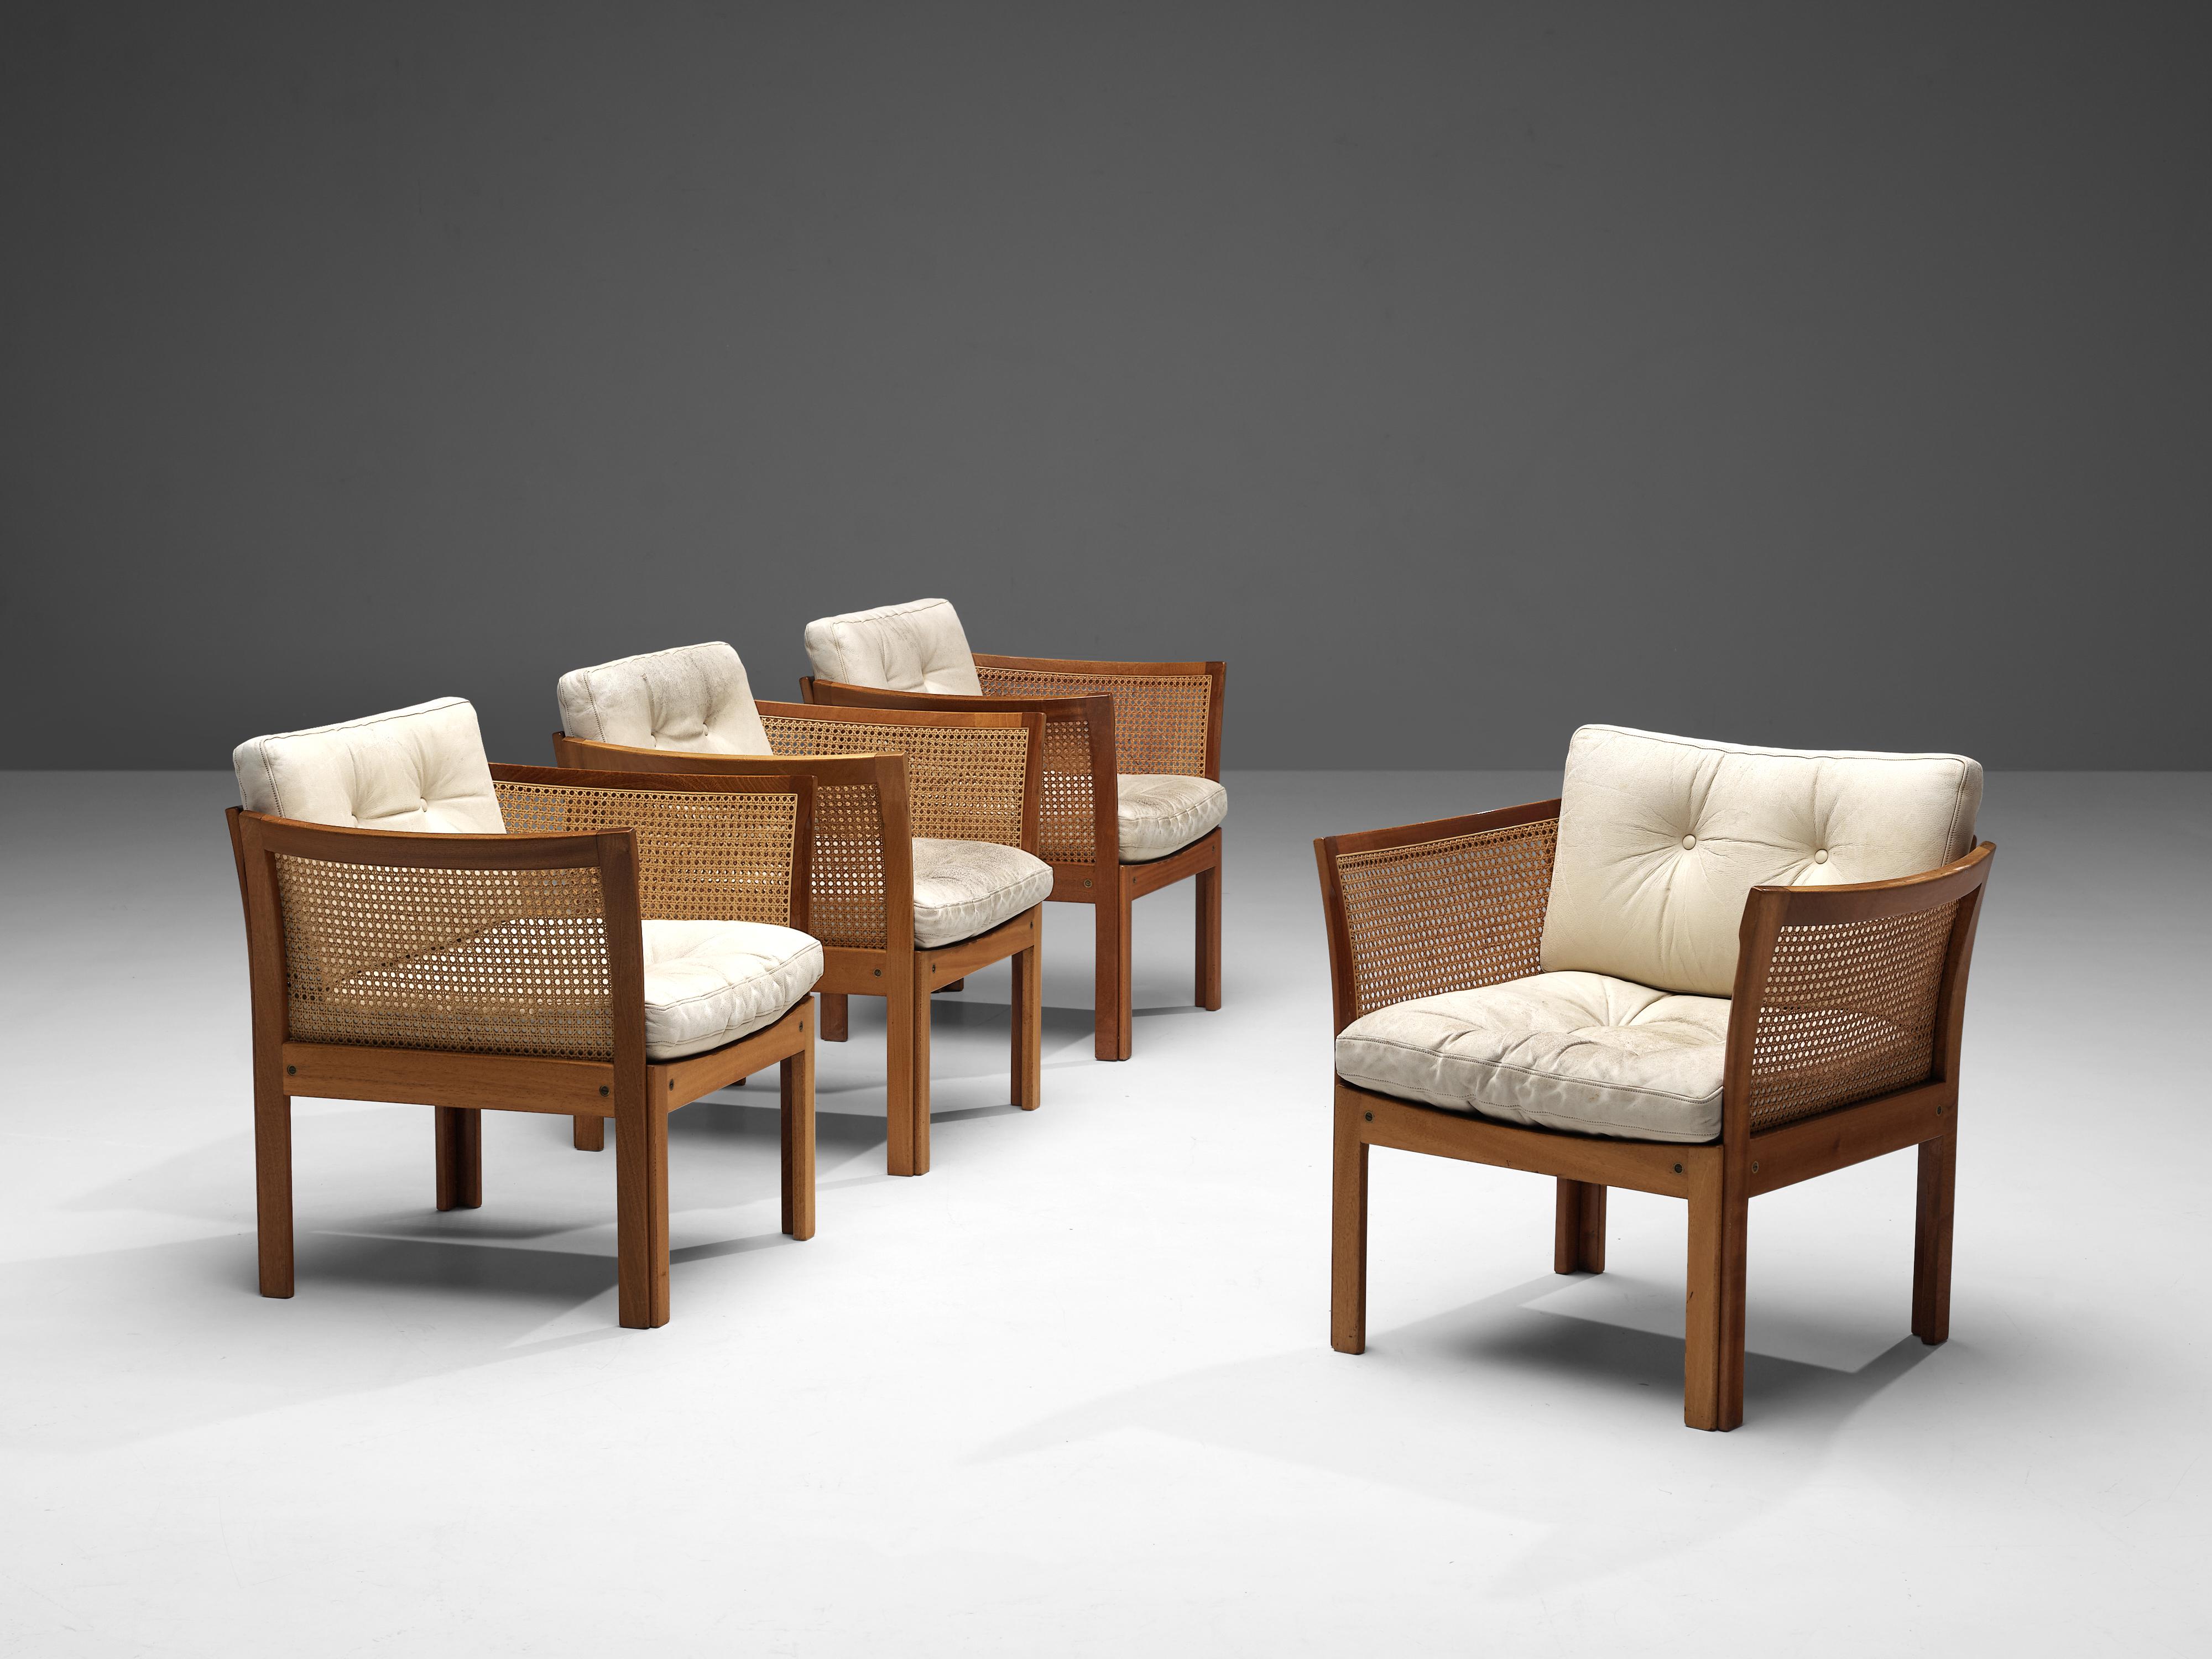 Illum Wikkelsø, lounge chairs, cane, mahogany, leather, Denmark, 1950s

These easy chairs by Illum Wikkelsoø shows a beautiful combinations of materials and textures. The chairs' most distinctive feature is the frame in mahogany that curves